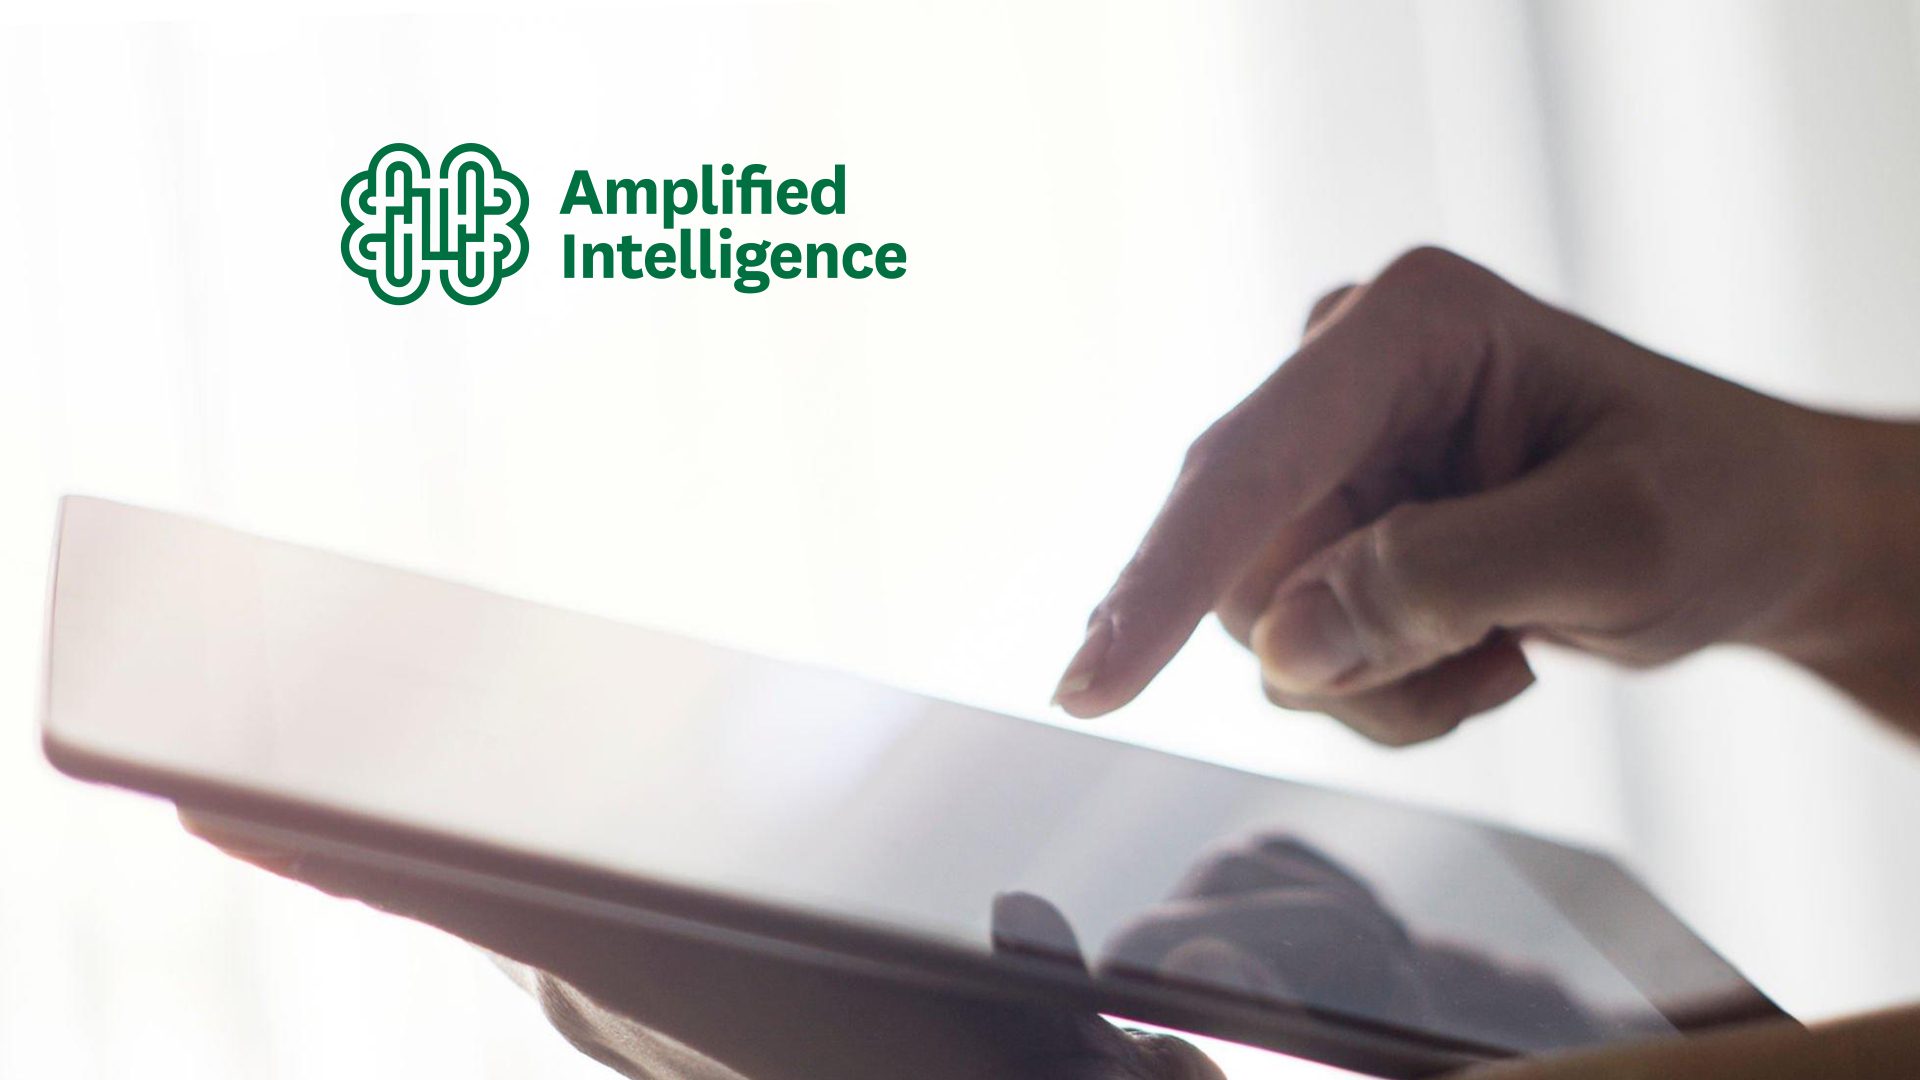 Amplified Intelligence launches the next generation of attention-based media planning